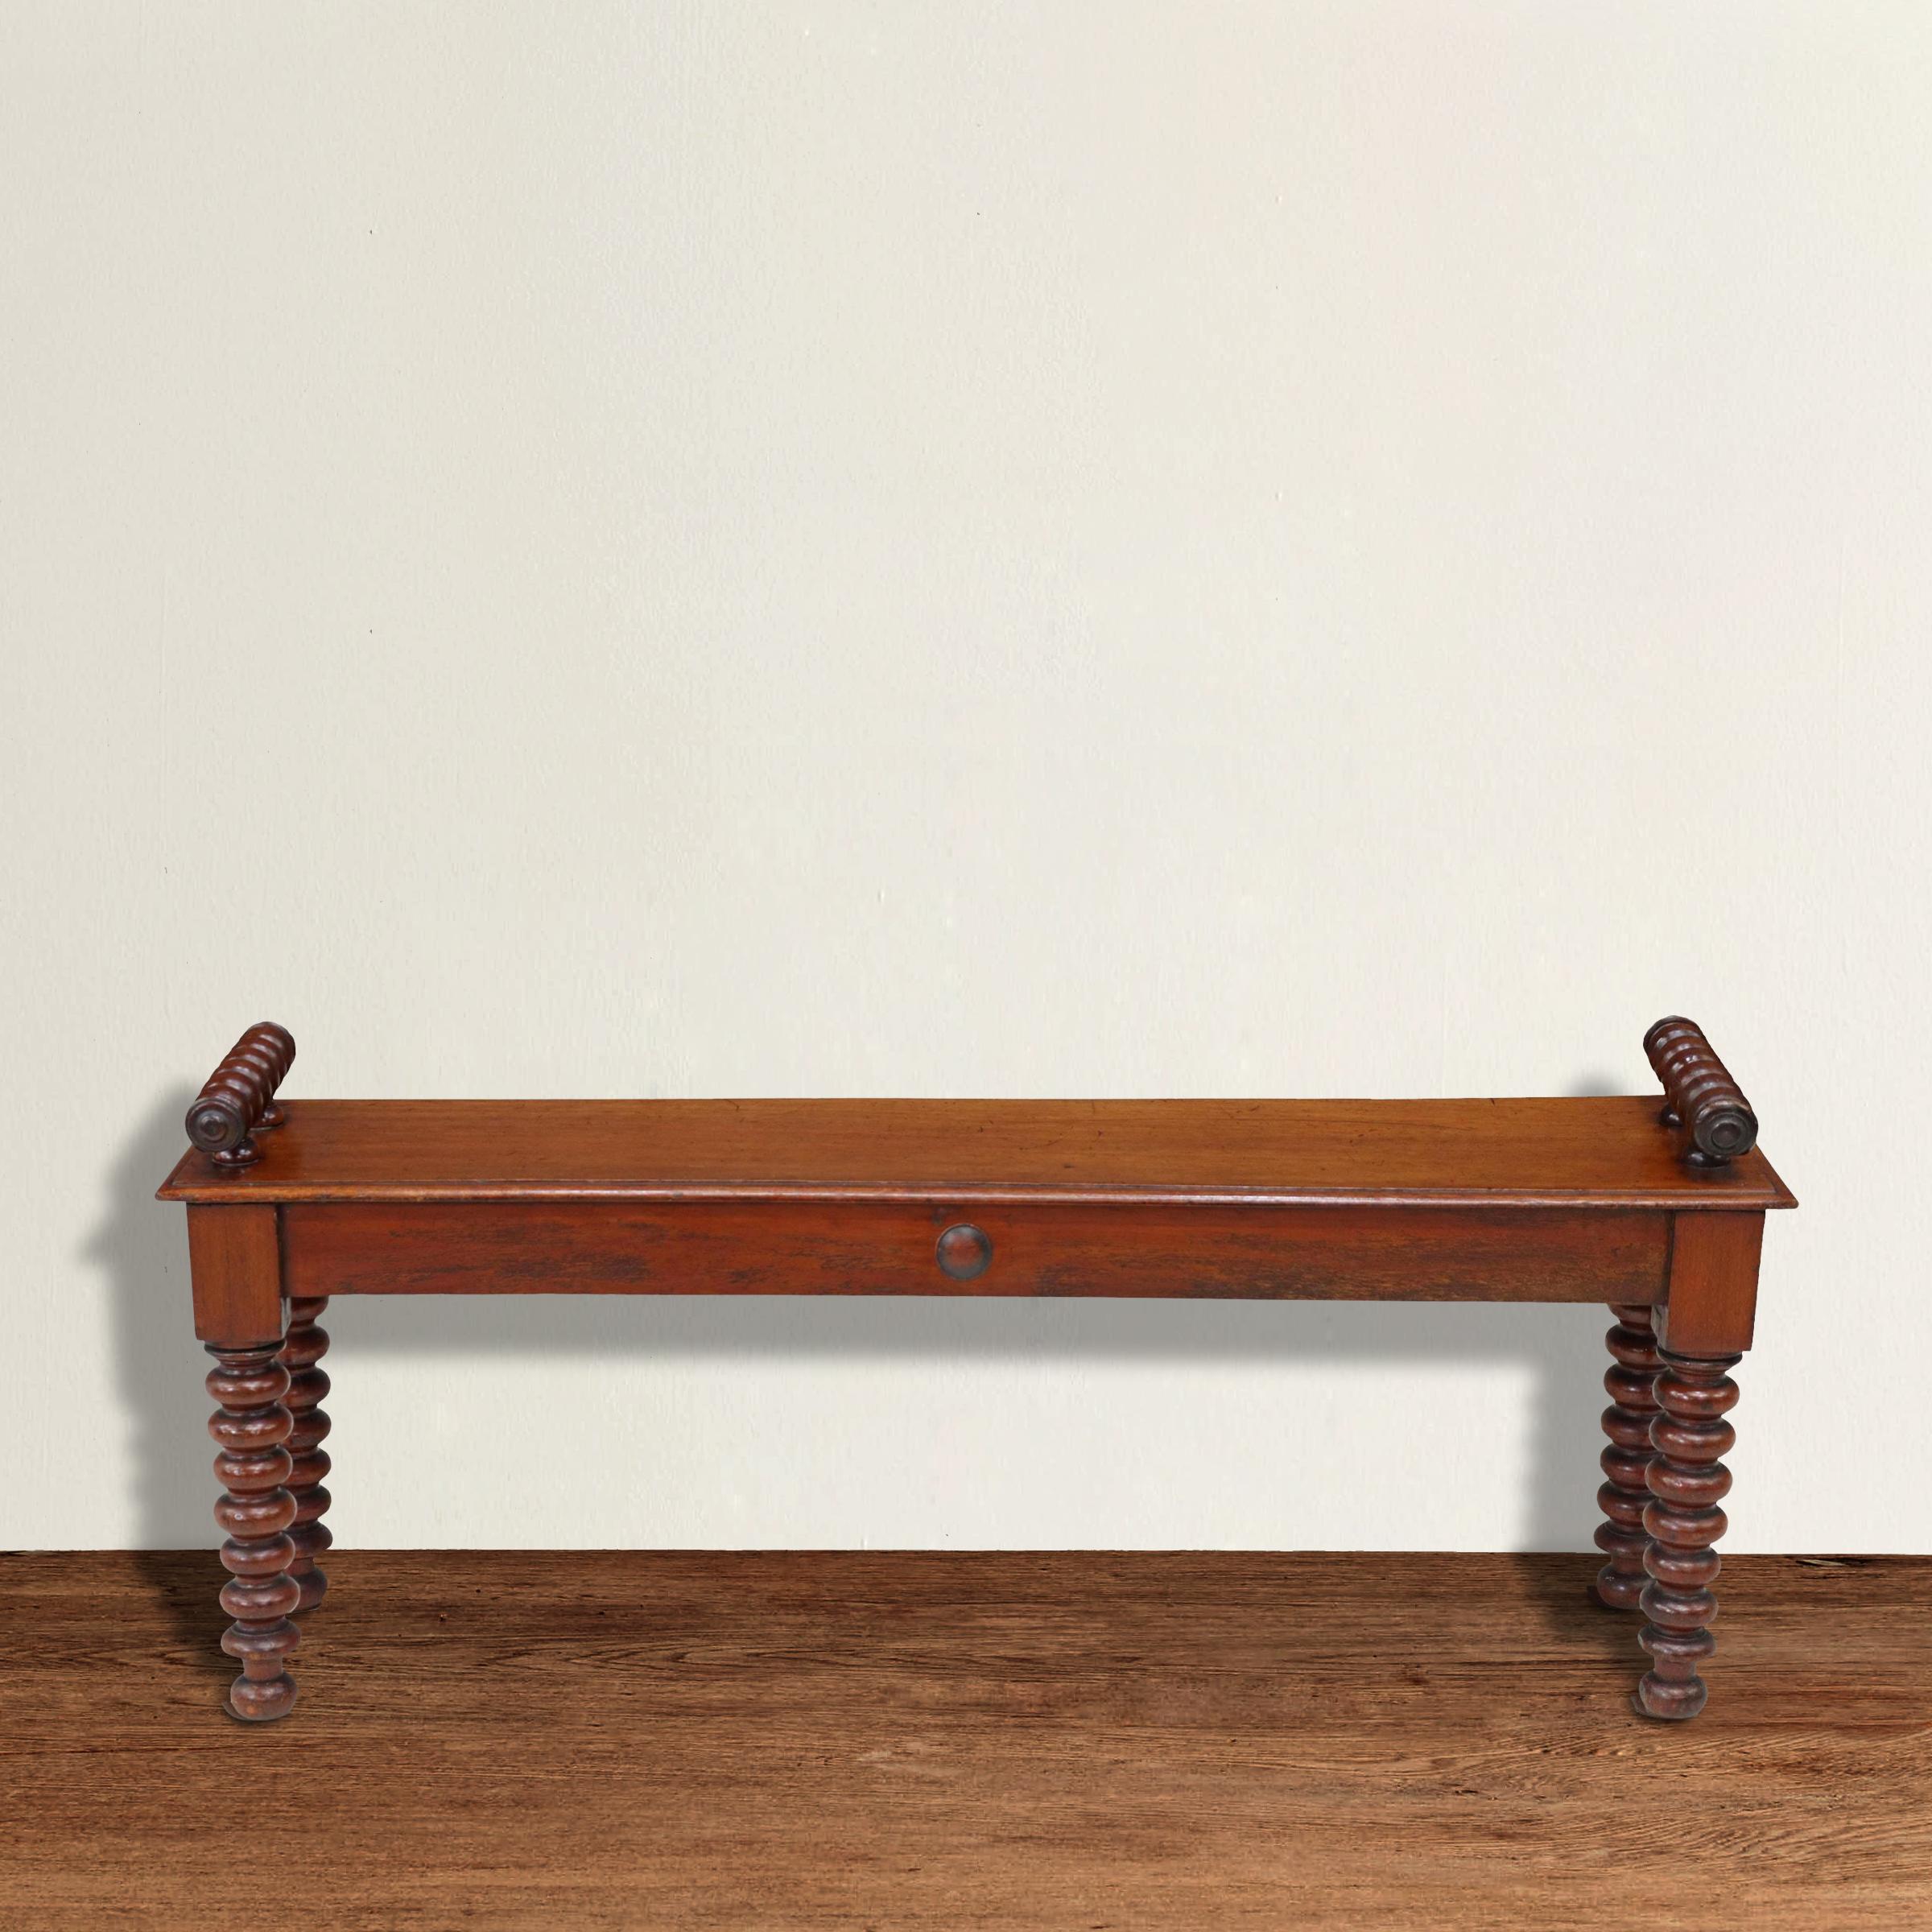 A quirky yet elegant 19th century English mahogany hall bench with the best turned 